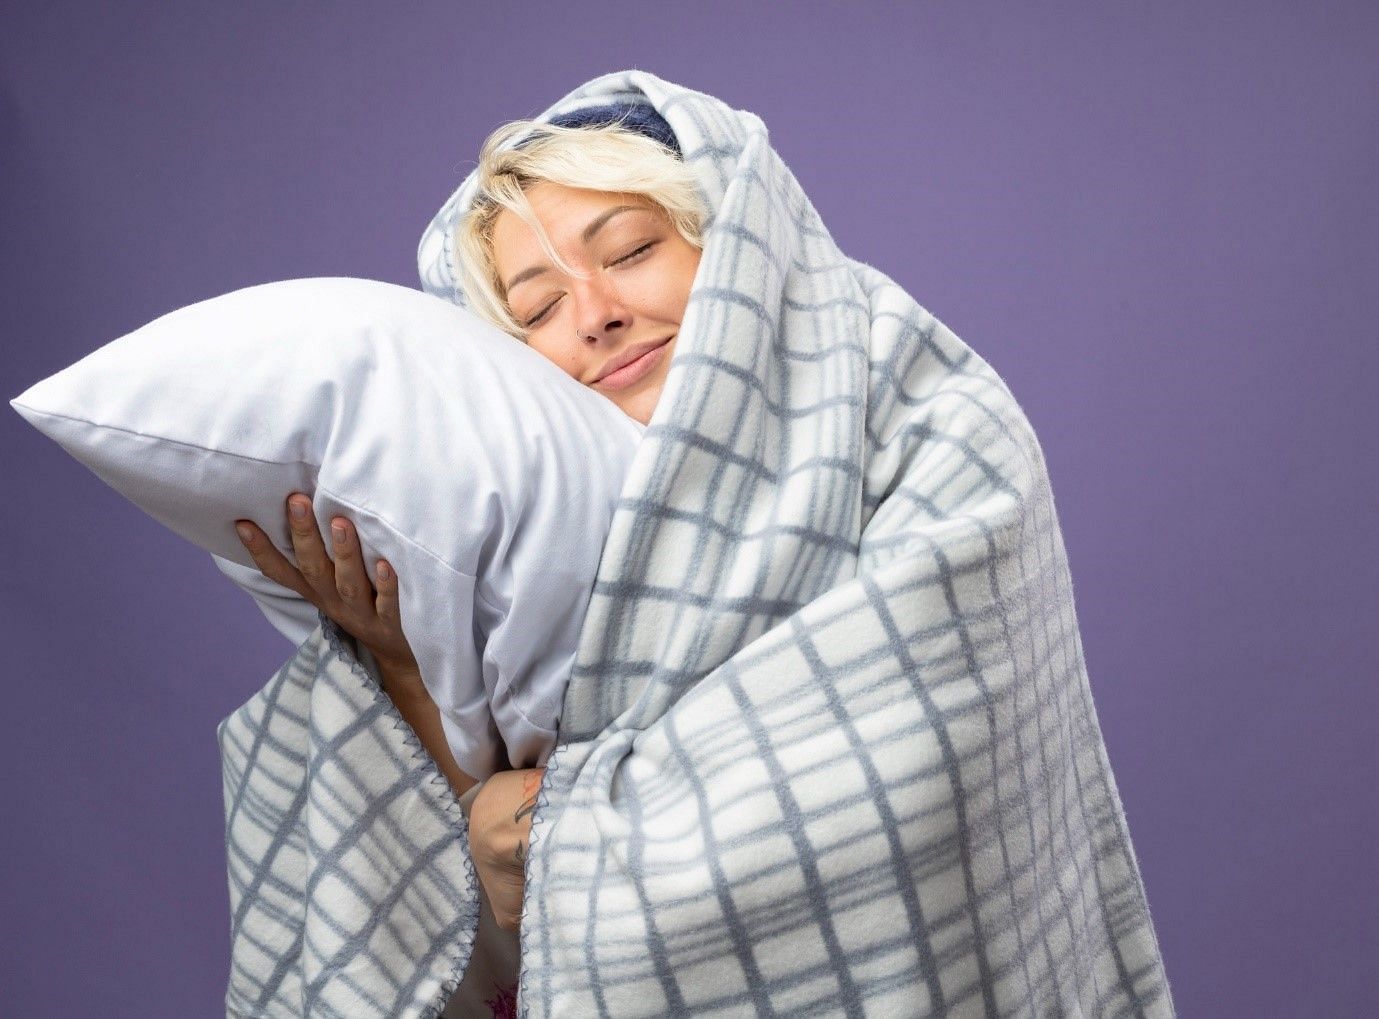 Cooling Blankets keep your sweating at bay (Image by Stockking on Freepik)